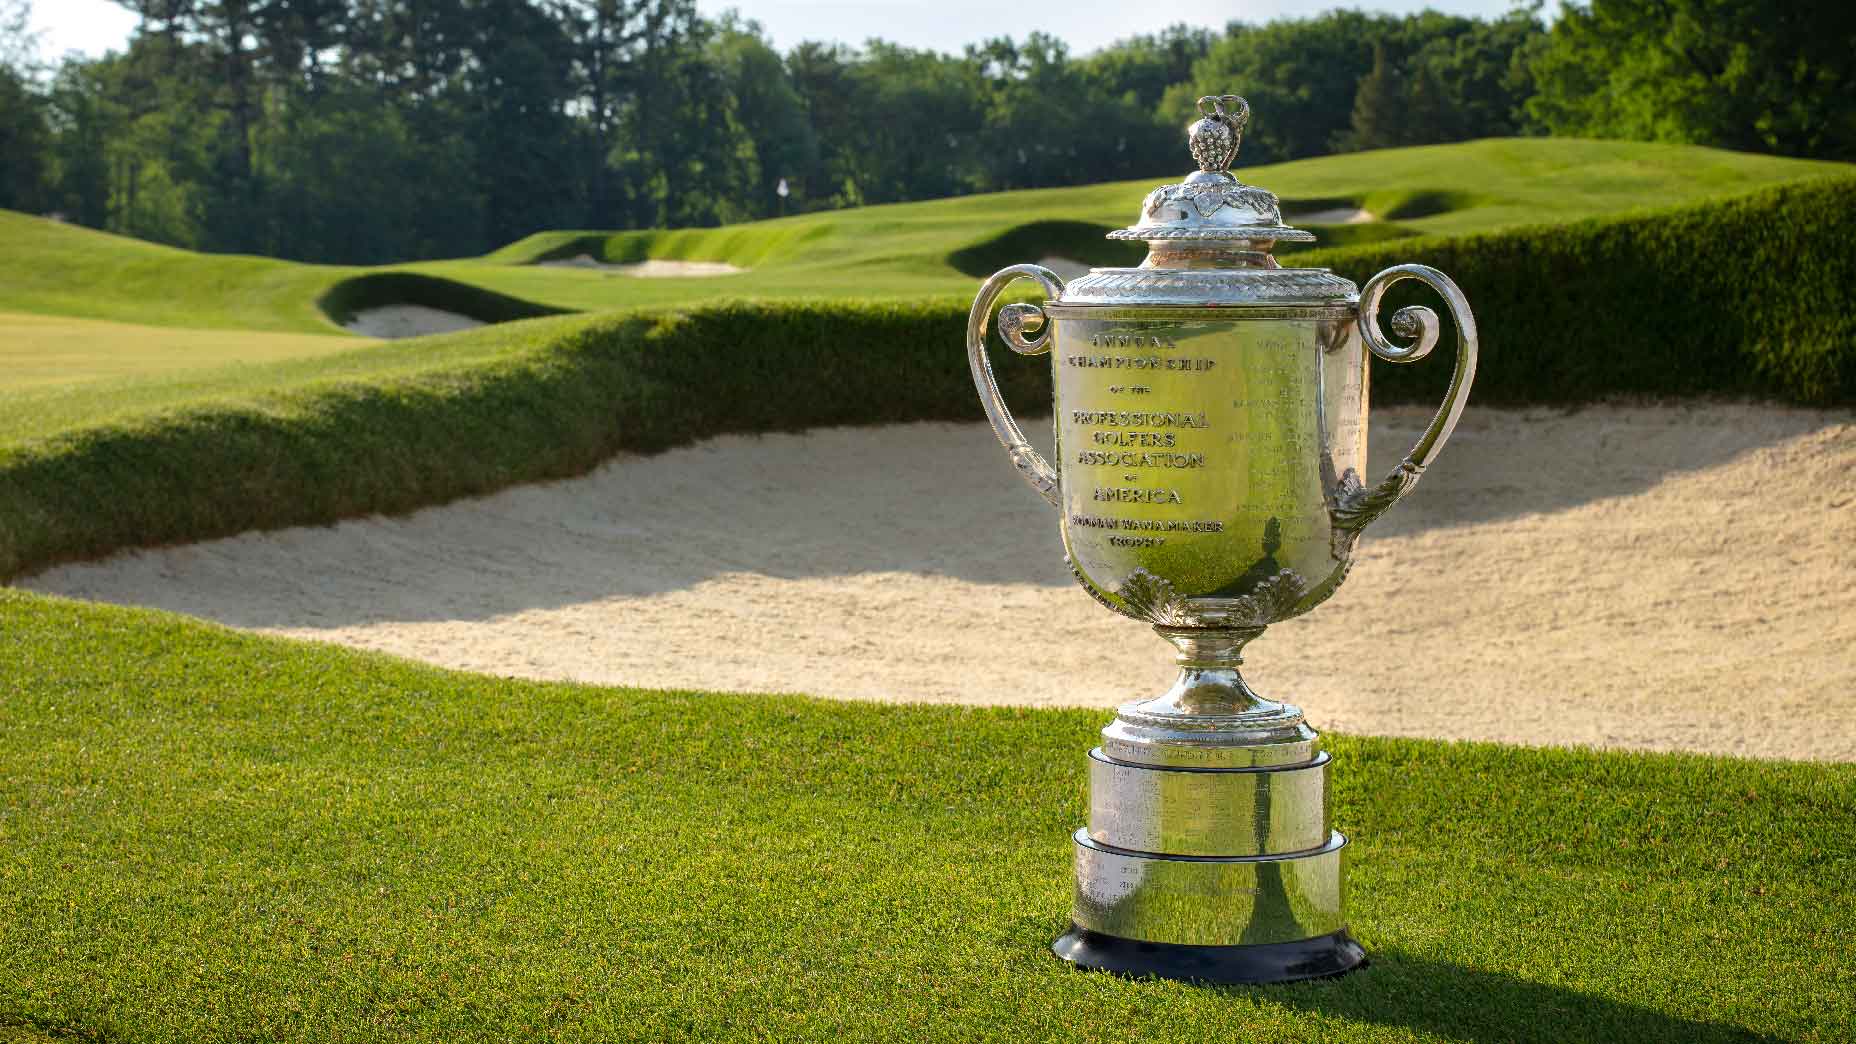 2023 PGA Championship schedule TV times, channel, streaming, dates